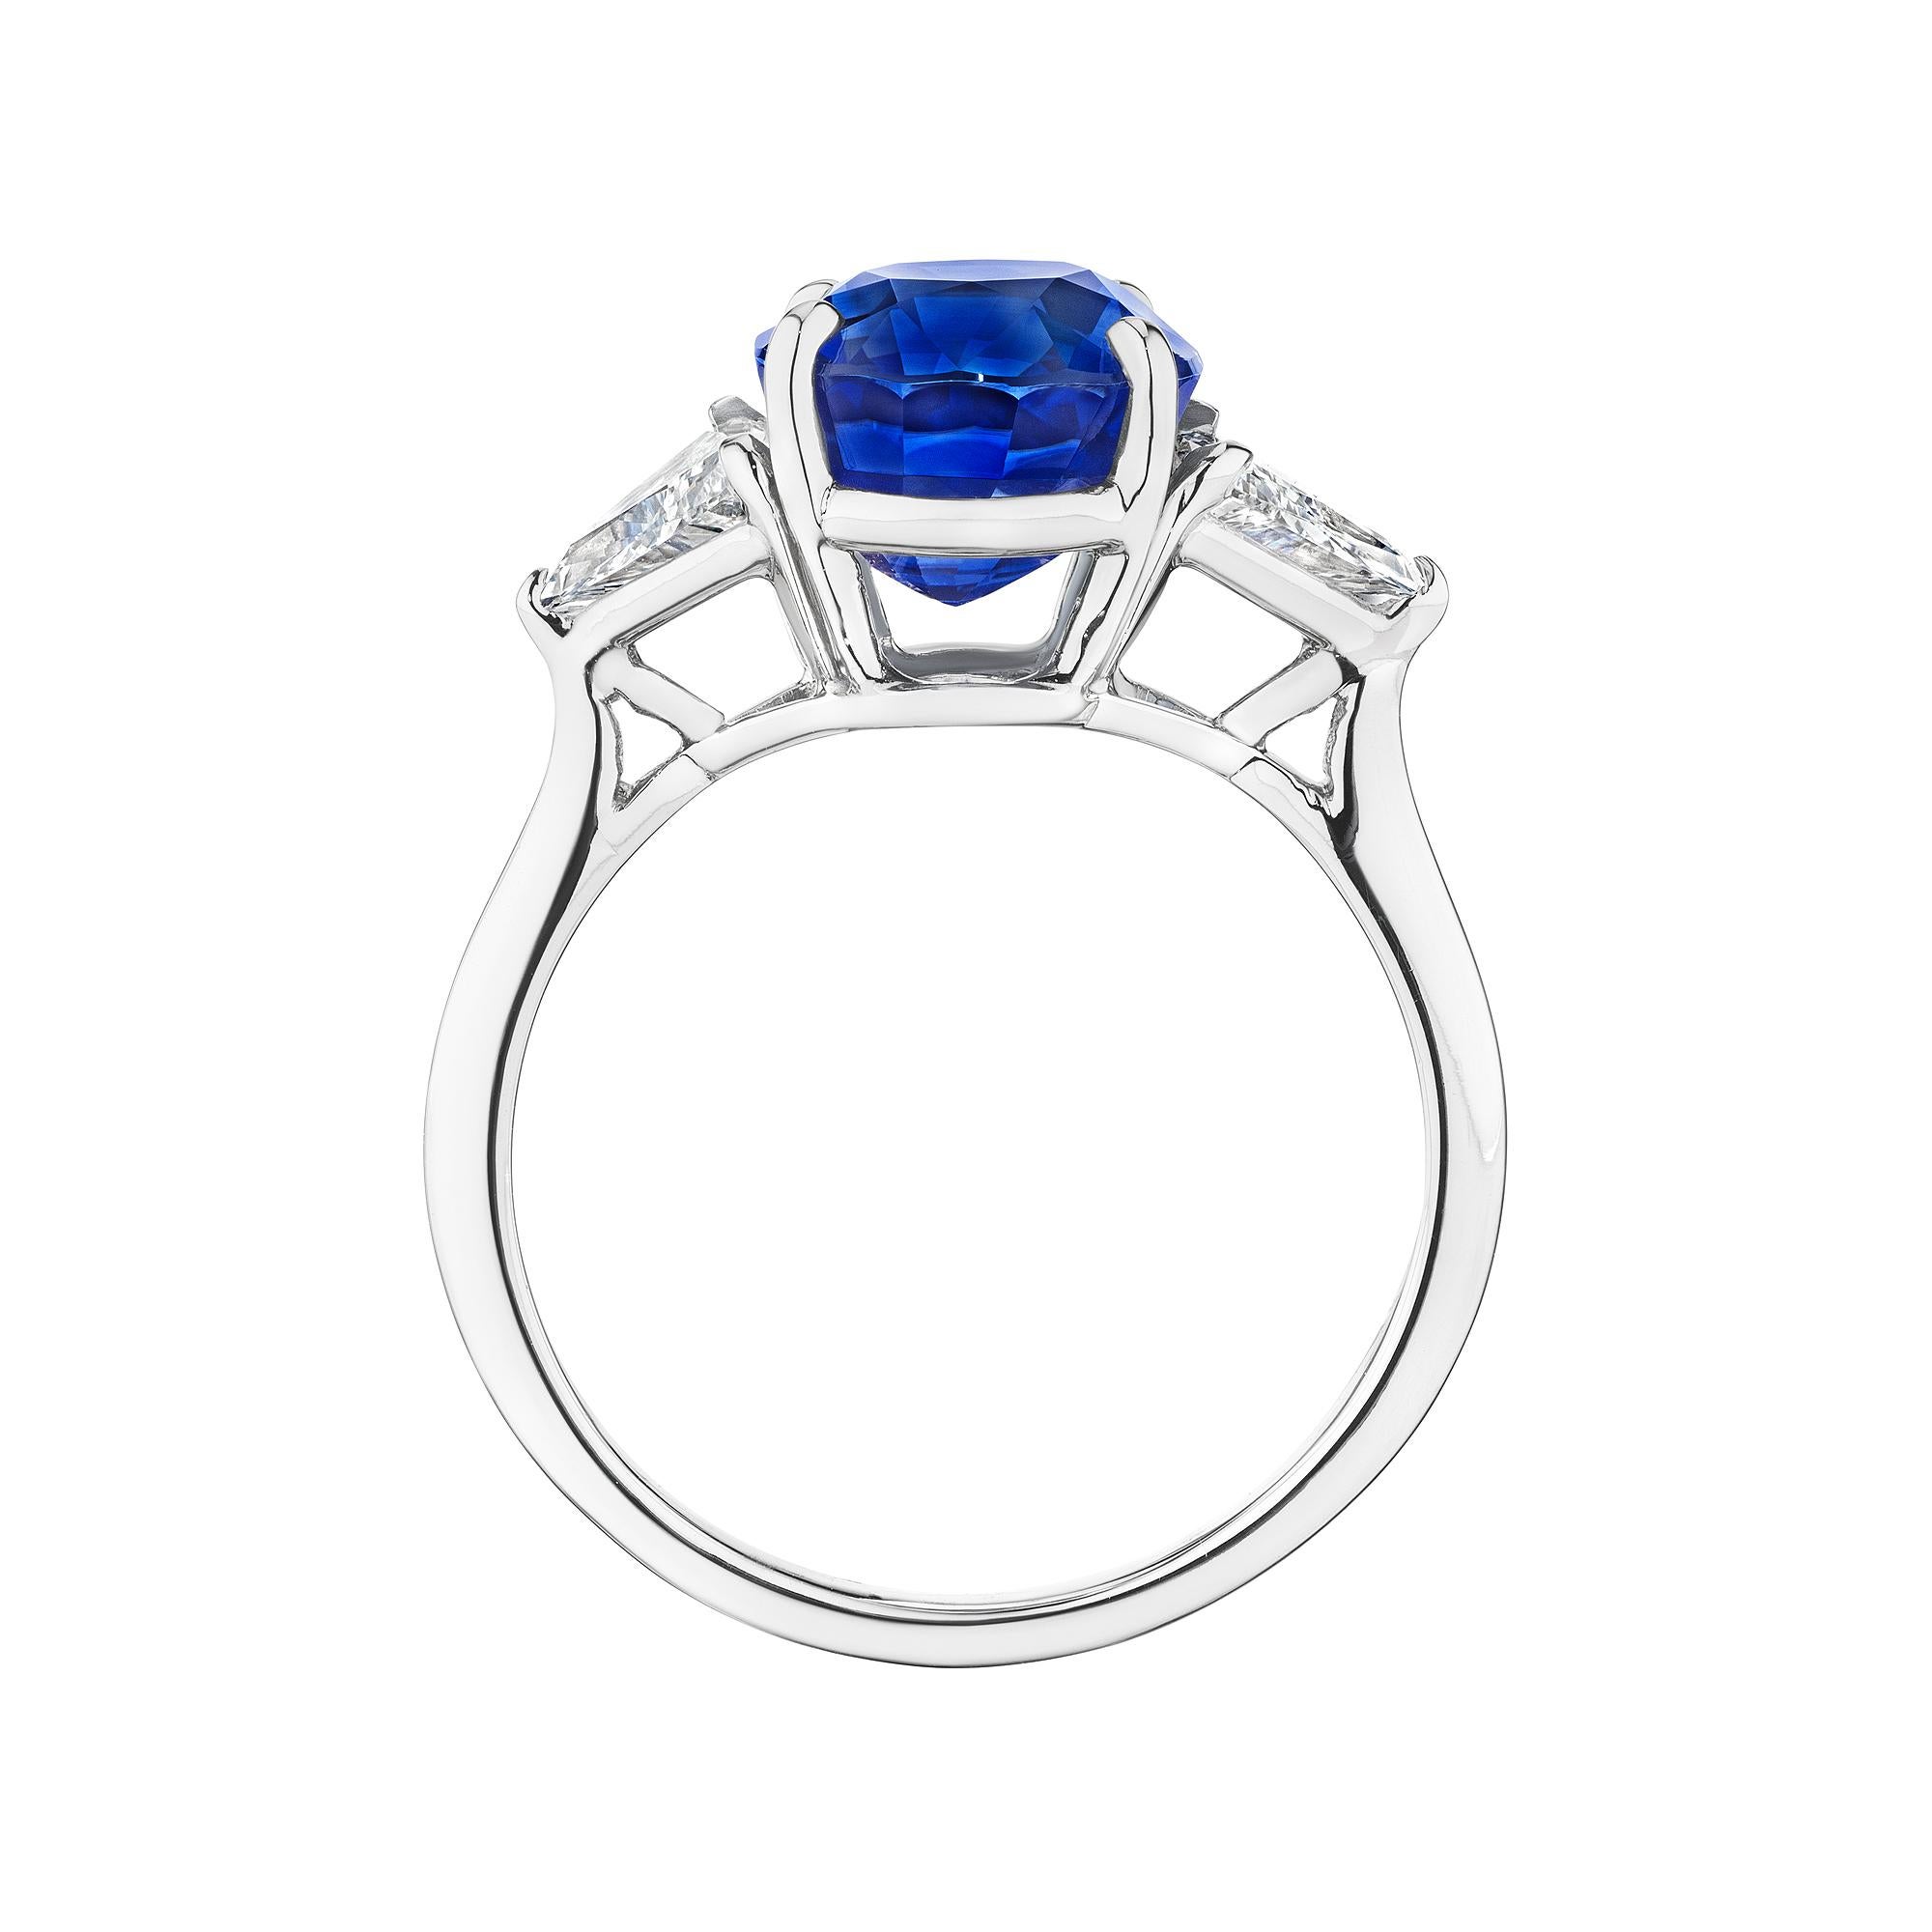 As exhilarating as a velvety midnight blue sky, this Cartier sapphire and diamond ring is mesmerizing.  With an 4.67 oval cut AGL certified center natural sapphire and trillion side diamonds, this handmade platinum ring is a one-of-a-kind